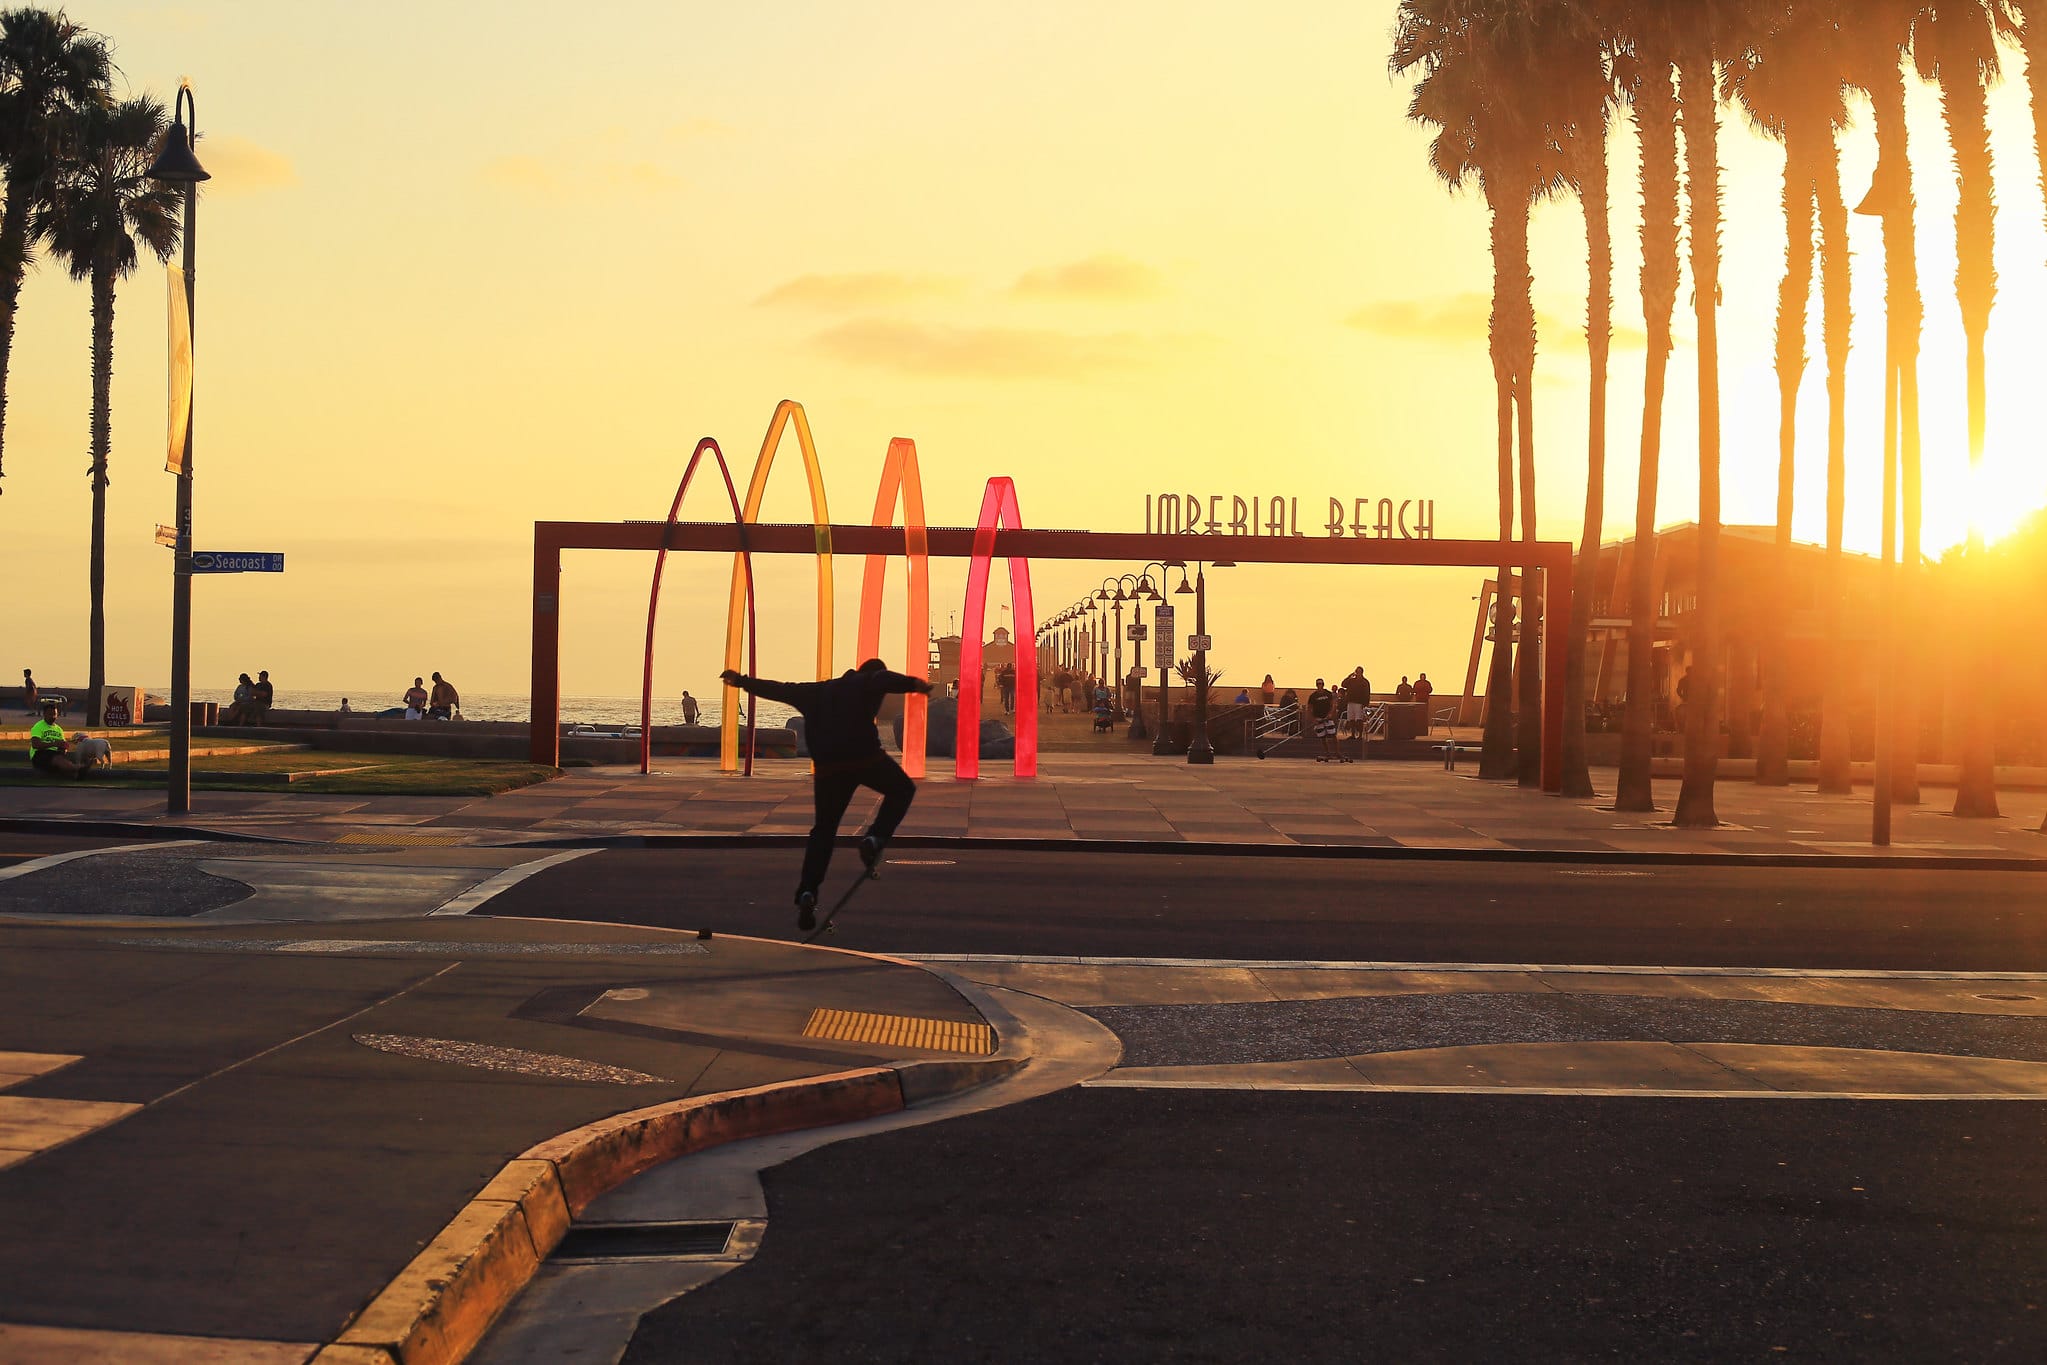 Image of a skateboarder at sunset at imperial beach city beach in california